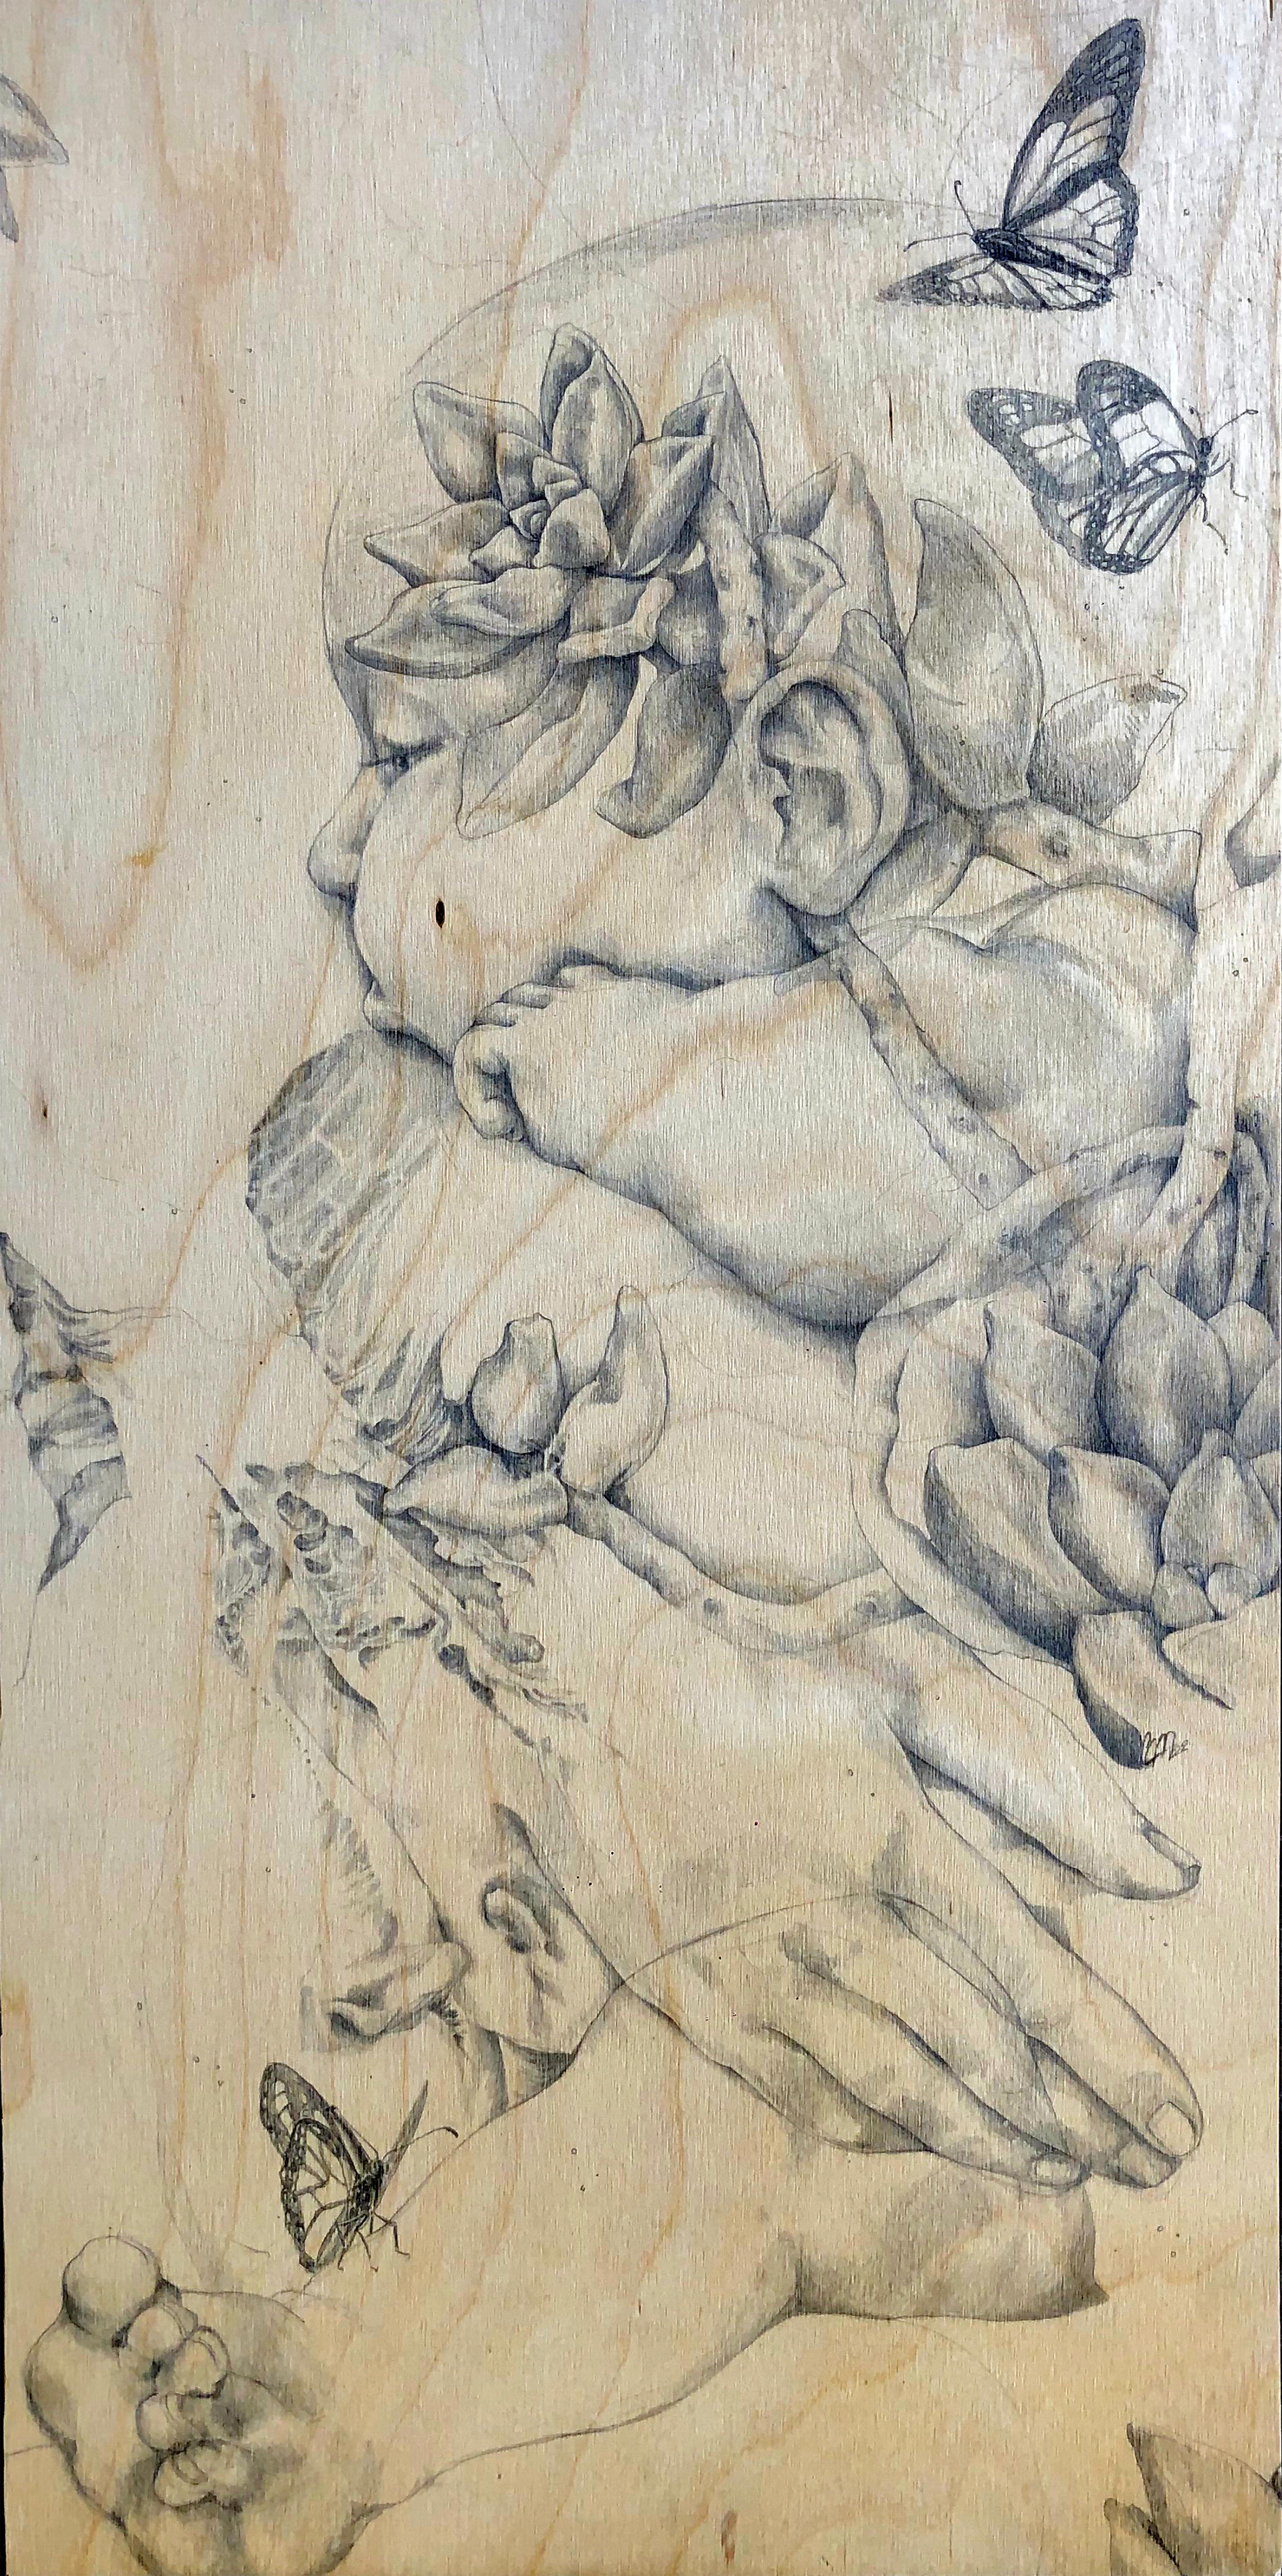 Graphite Drawing on Wood Titled, "Aren't We All Made Of The Same Stardust?"